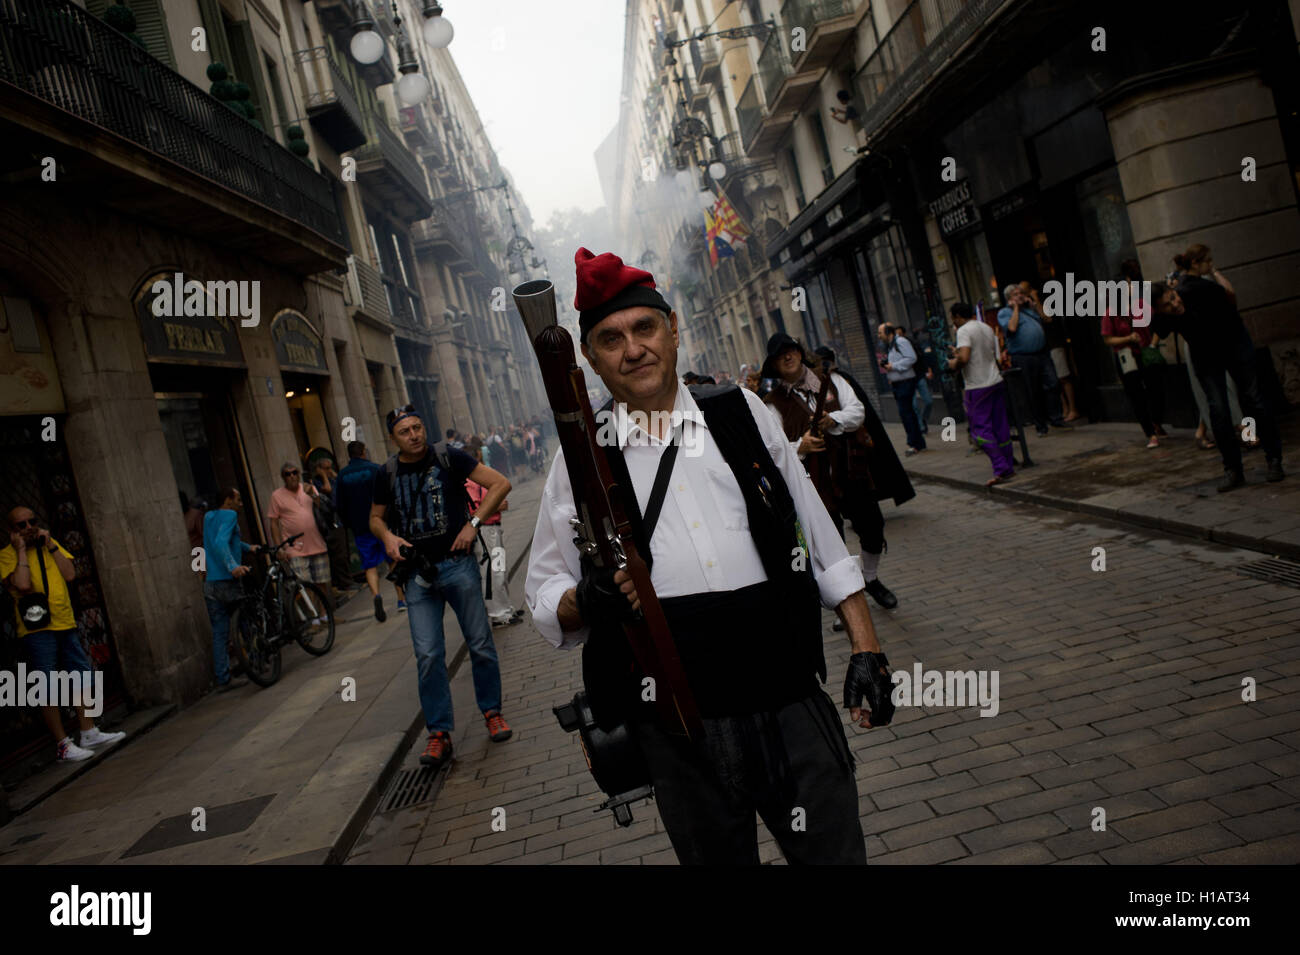 Barcelona, Catalonia, Spain. 24th Sep, 2016. A trabucaire through the streets of Barcelona early in the morning on the occasion of the celebrations of the Merce Festival (Festes de la Merce). The Galejada Trabucaire marks the beginning of the day of the patron saint of Barcelona, La Merce. Men and women dressed as ancient Catalan bandits take to the streets of the old part of Barcelona and cause a loud noise with his blunderbusses full of gunpowder. © Jordi Boixareu/ZUMA Wire/Alamy Live News Stock Photo